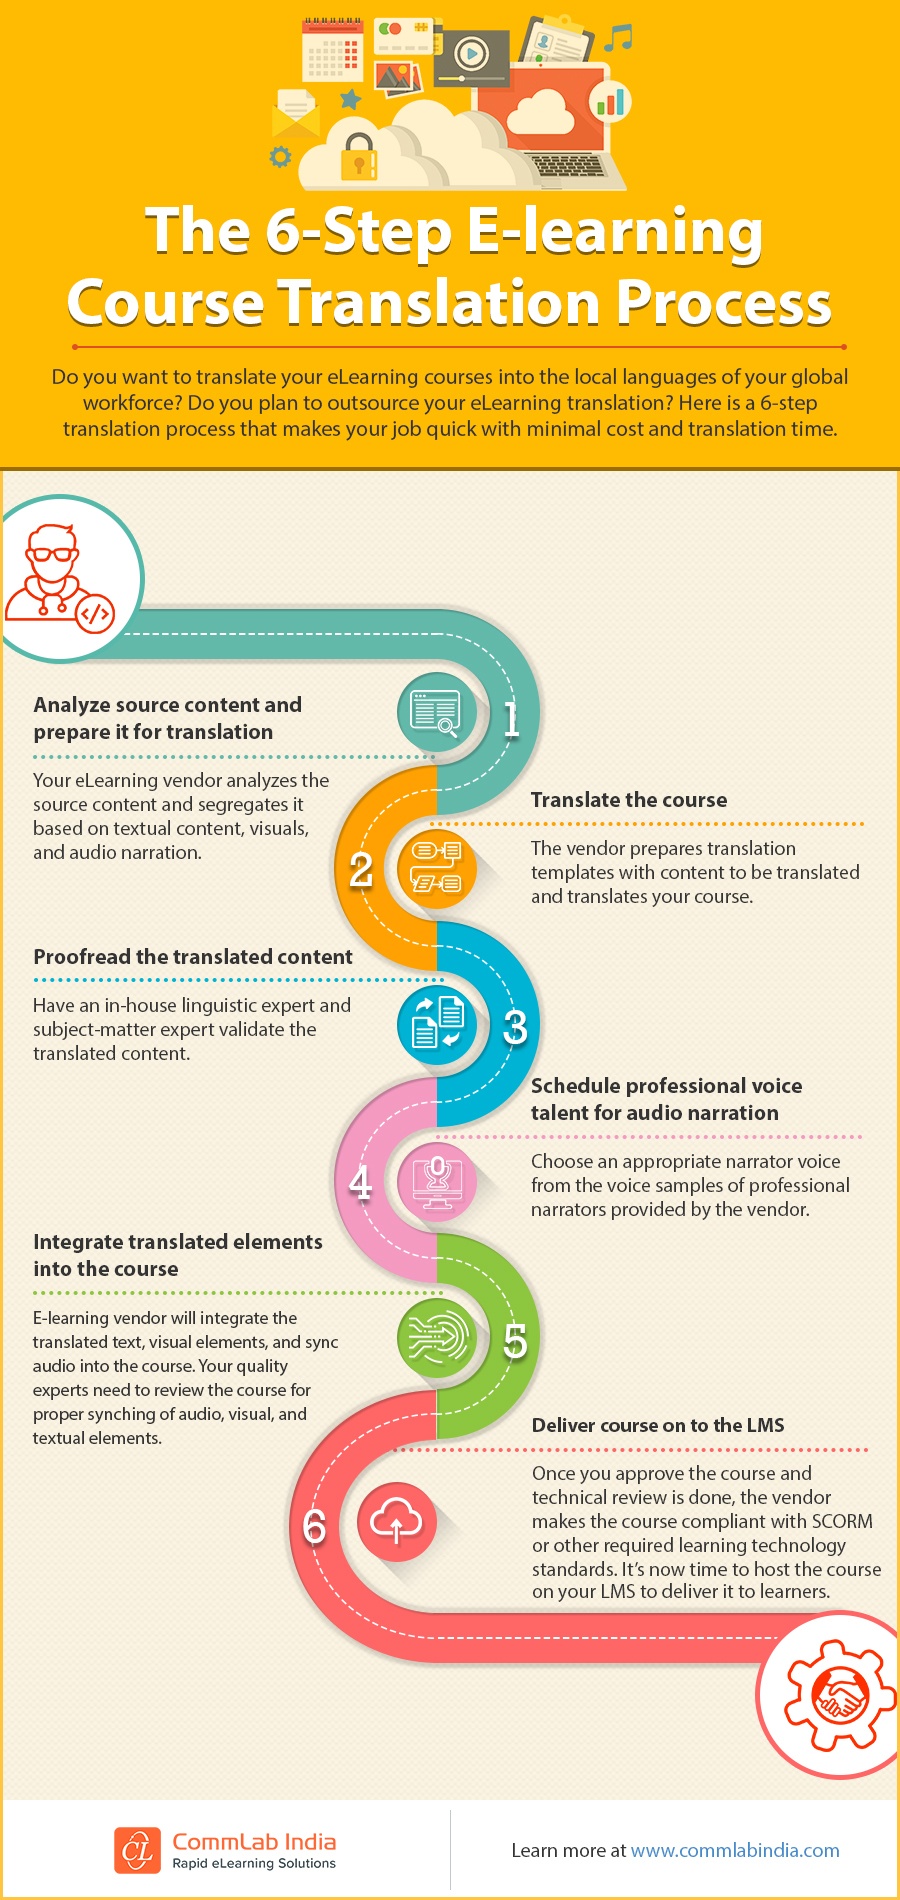 The 6-Step eLearning Course Translation Process